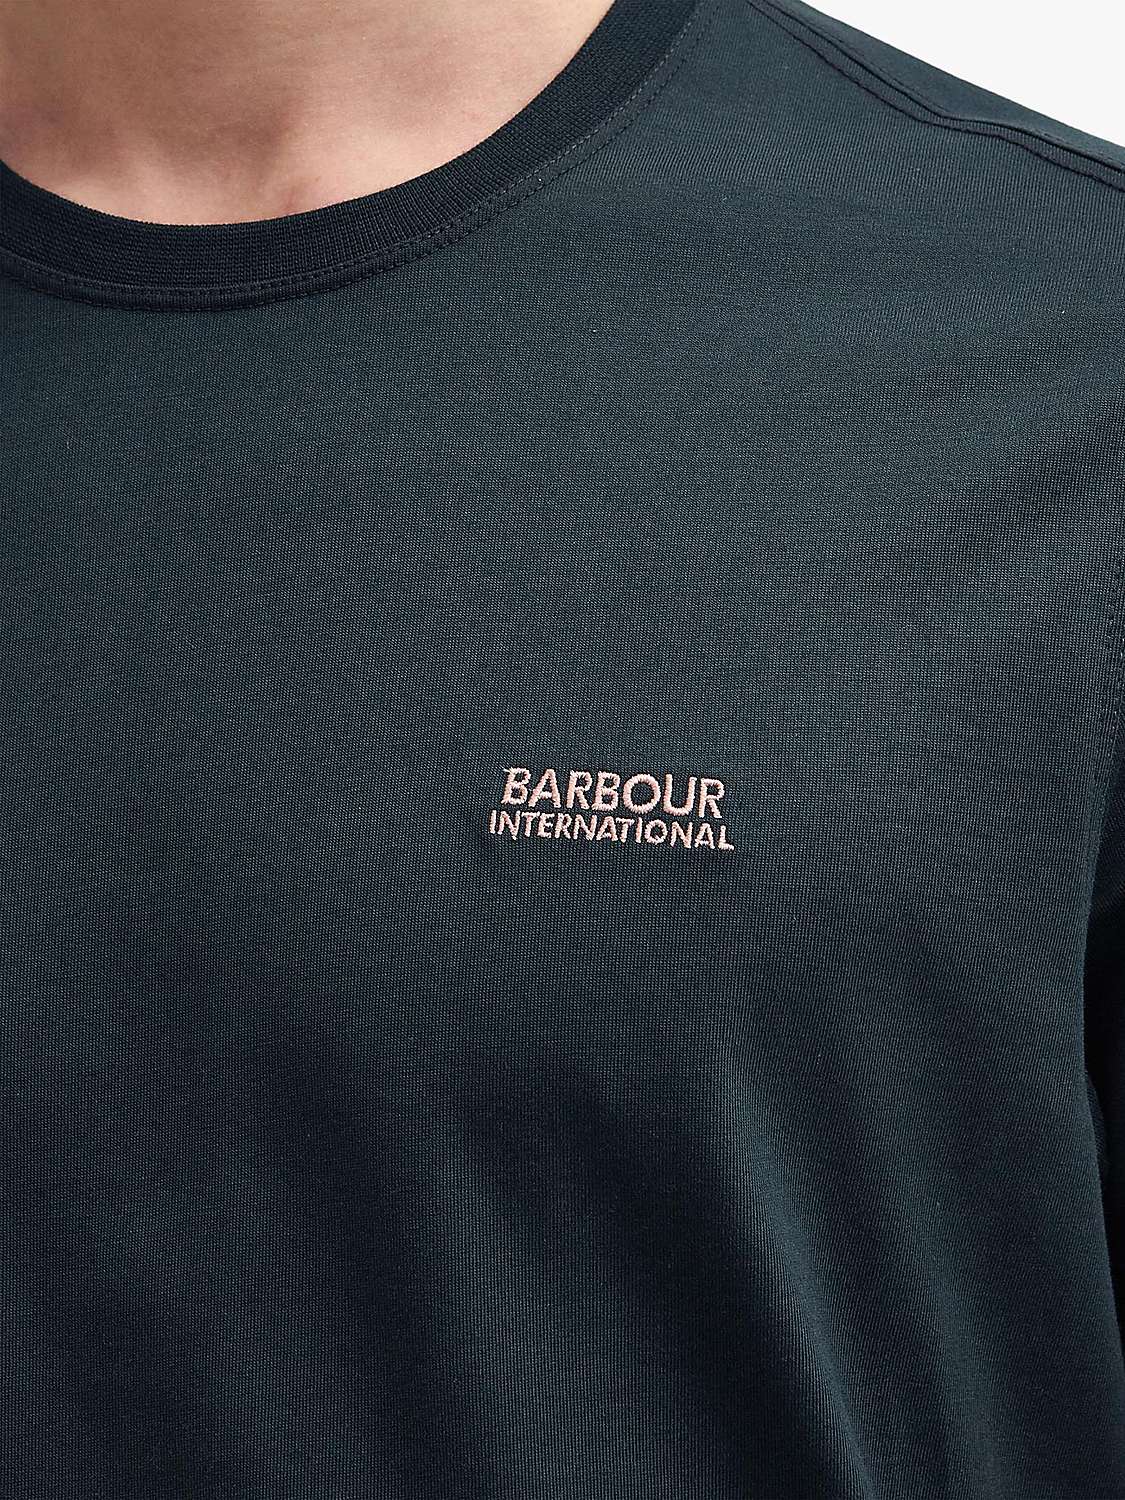 Buy Barbour International Philip Tipped T-Shirt Online at johnlewis.com